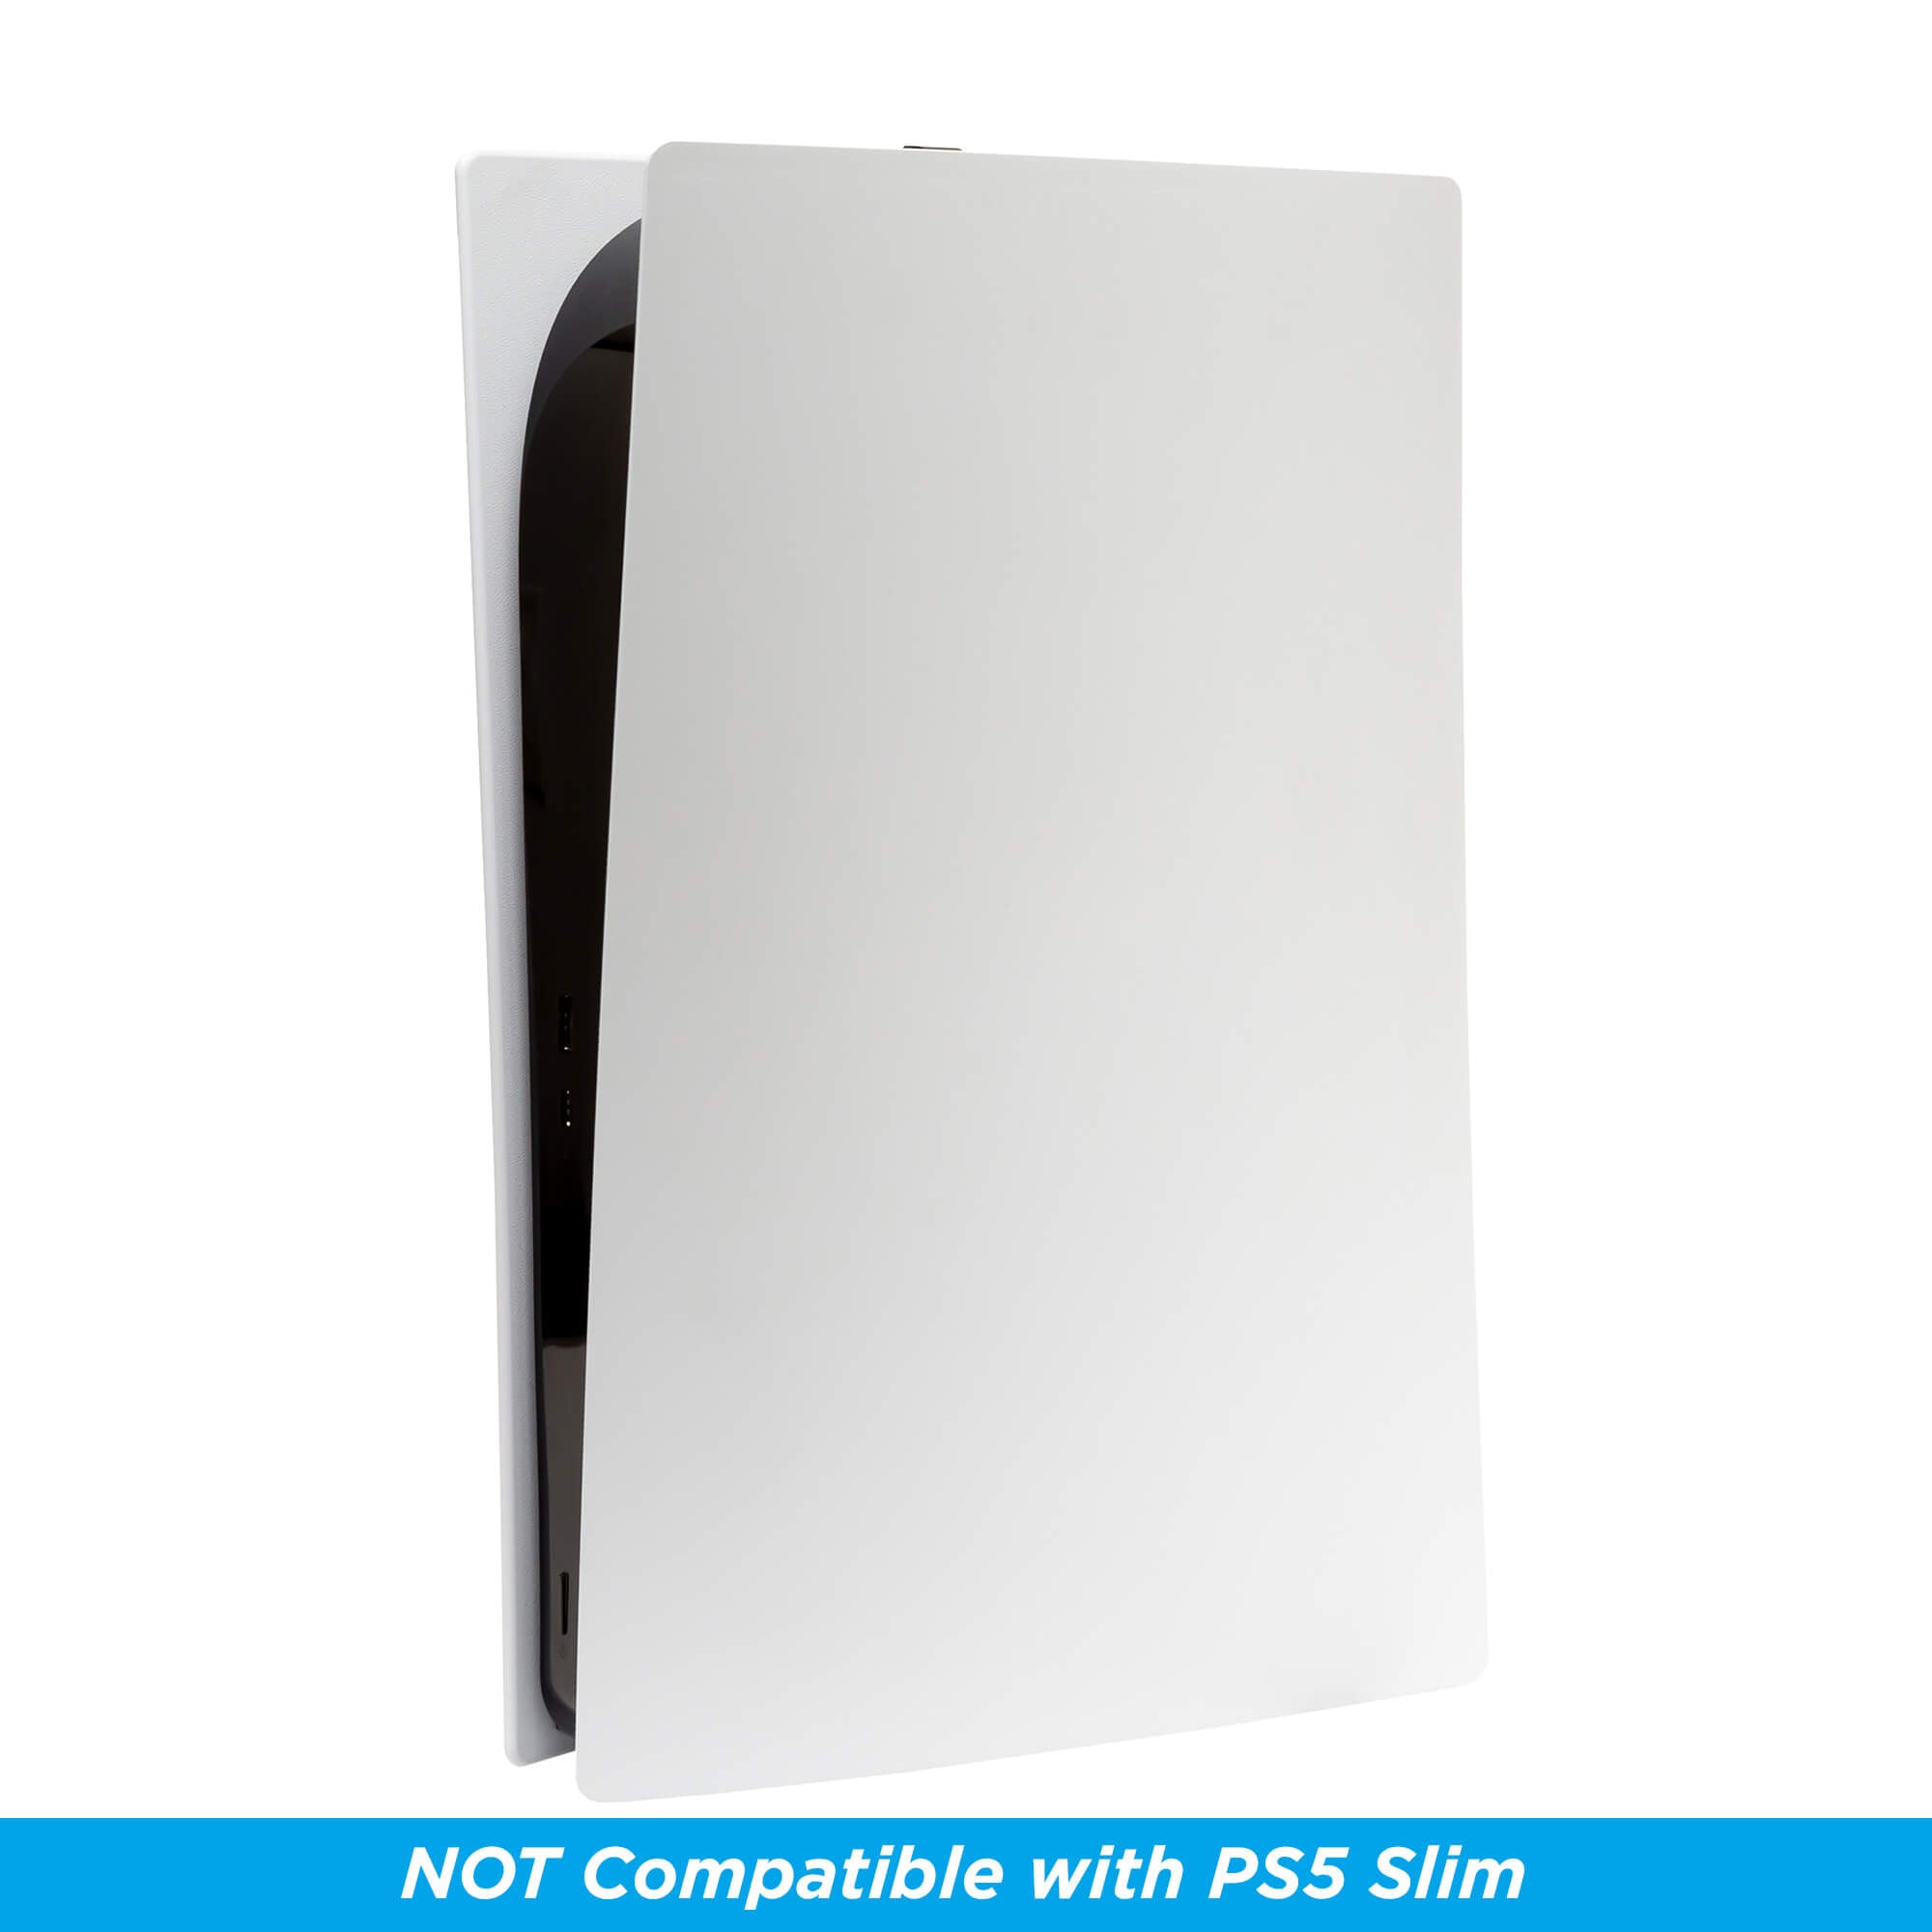 PS5 Digital shown in a HIDEit Mount for PS5 Wall Mount for the PlayStation 5 console. Fits the PS5 Digital and Standard PS5.